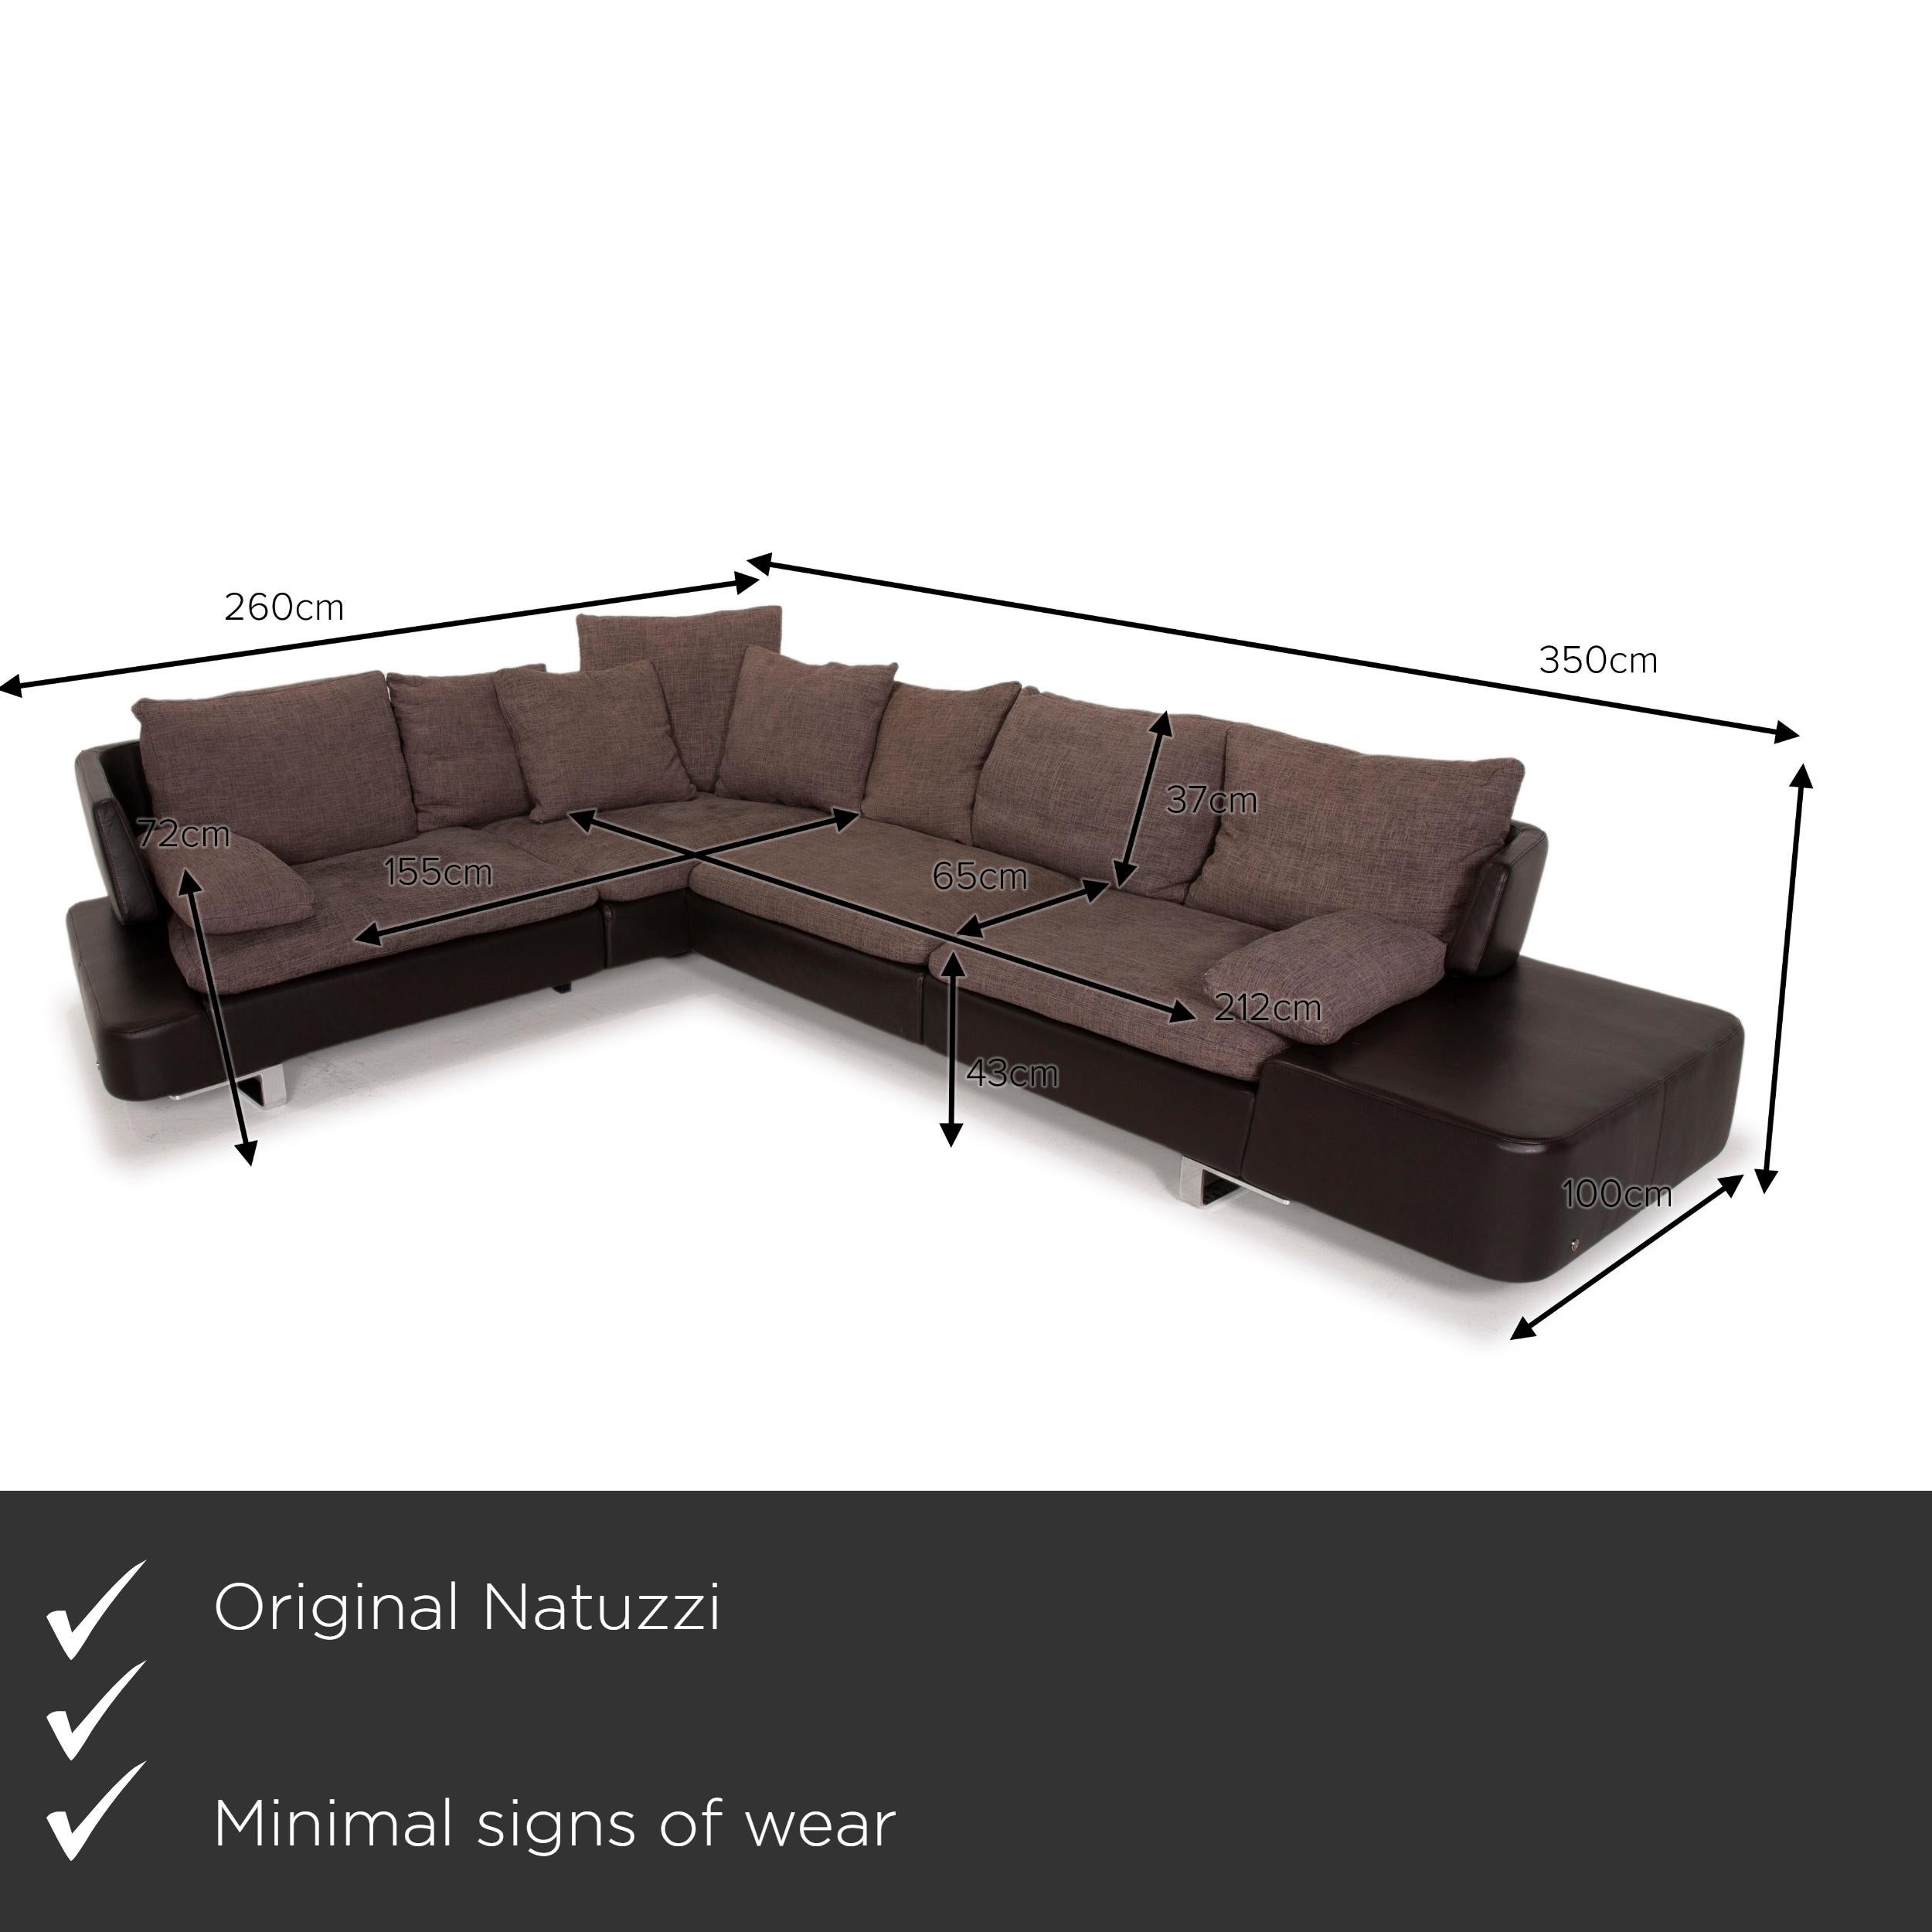 We present to you a Natuzzi Opus Brown leather corner sofa.


 Product measurements in centimeters:
 

Depth: 100
Width: 260
Height: 82
Seat height: 43
Rest height: 72
Seat depth: 65
Seat width: 155
Back height: 37.
 